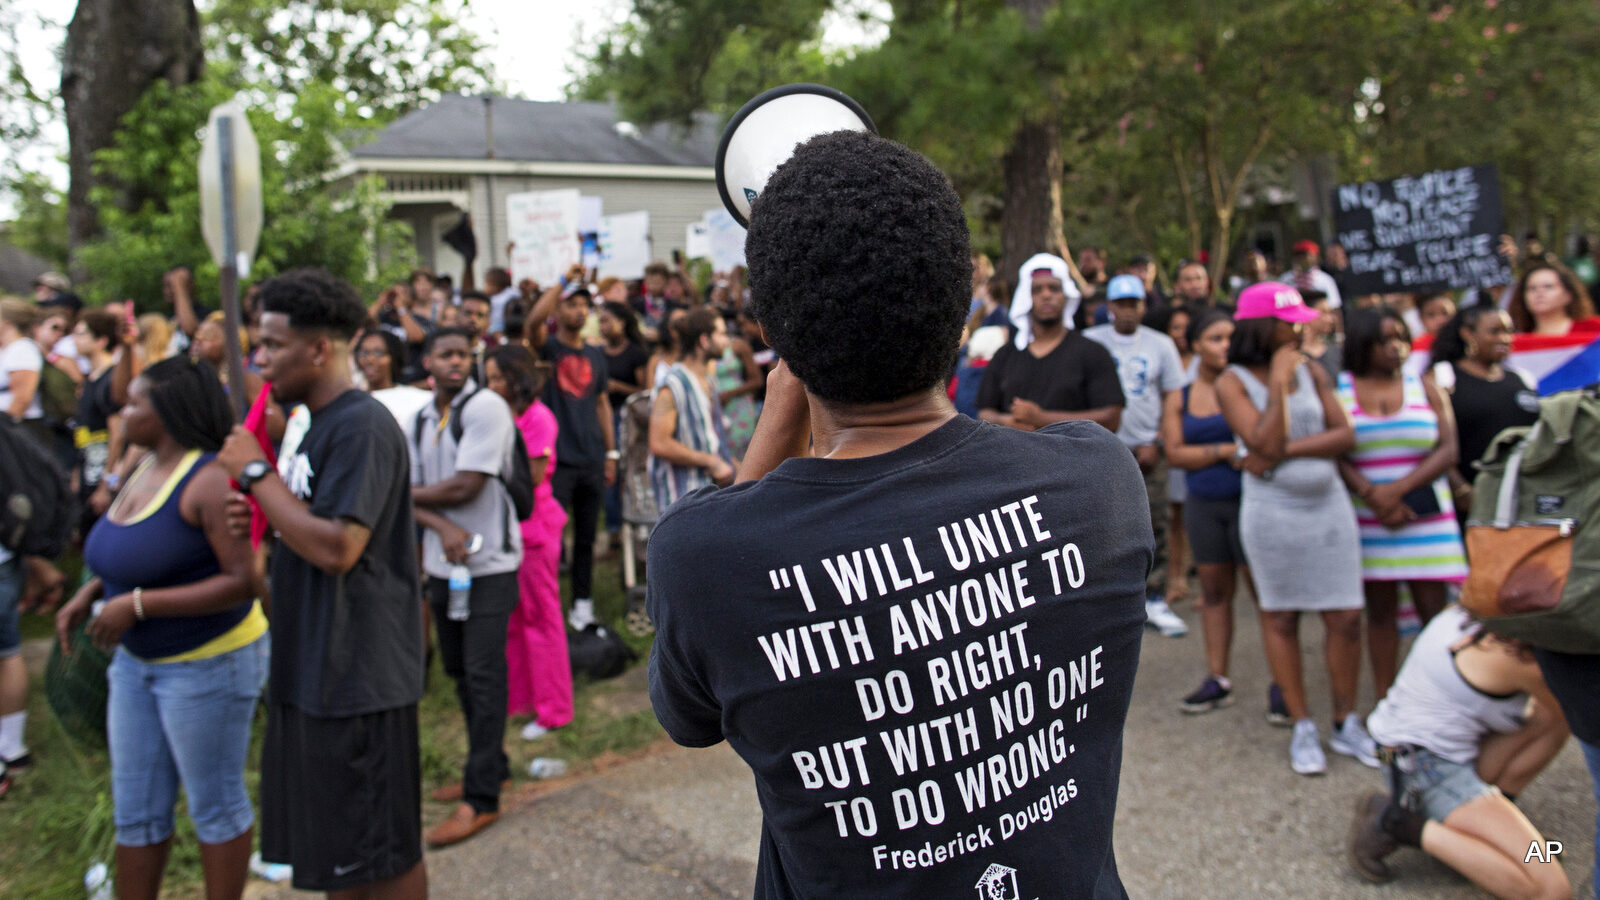 Protesters demonstrate a residential neighborhood in Baton Rouge, La. on Sunday, July 10, 2016.